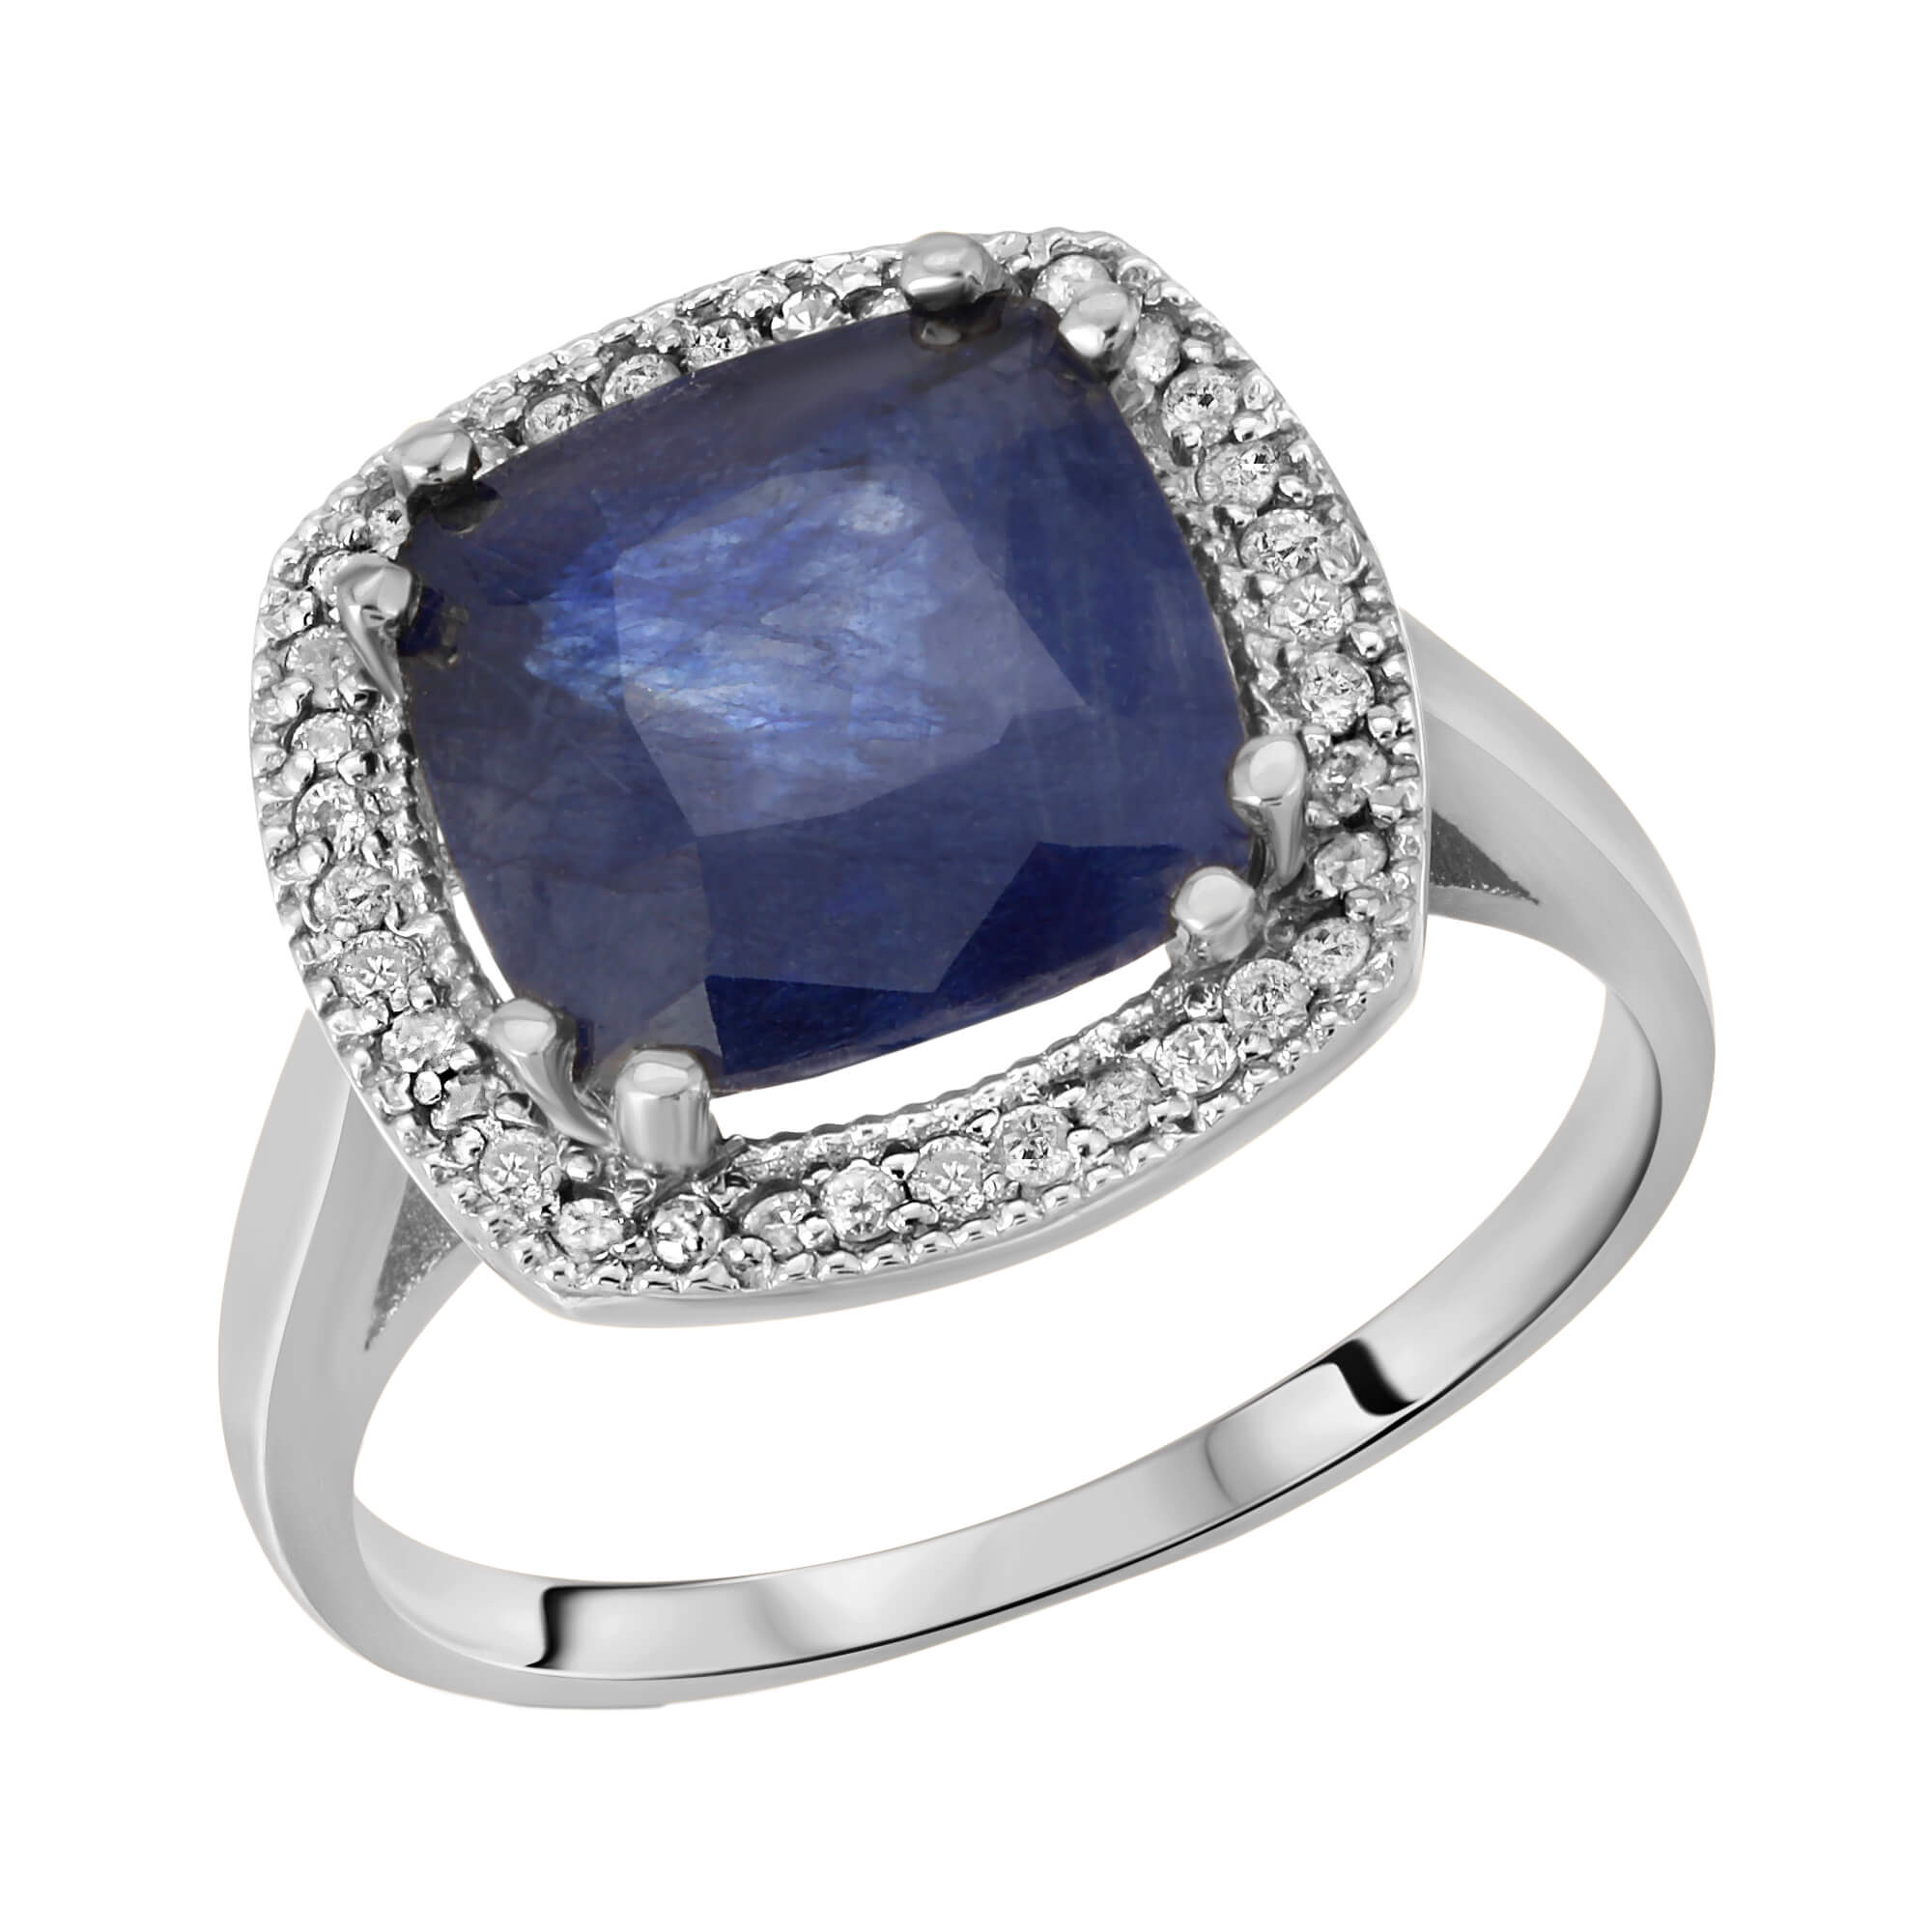 Cushion Cut Sapphire Ring 5.9 ctw in 9ct White Gold